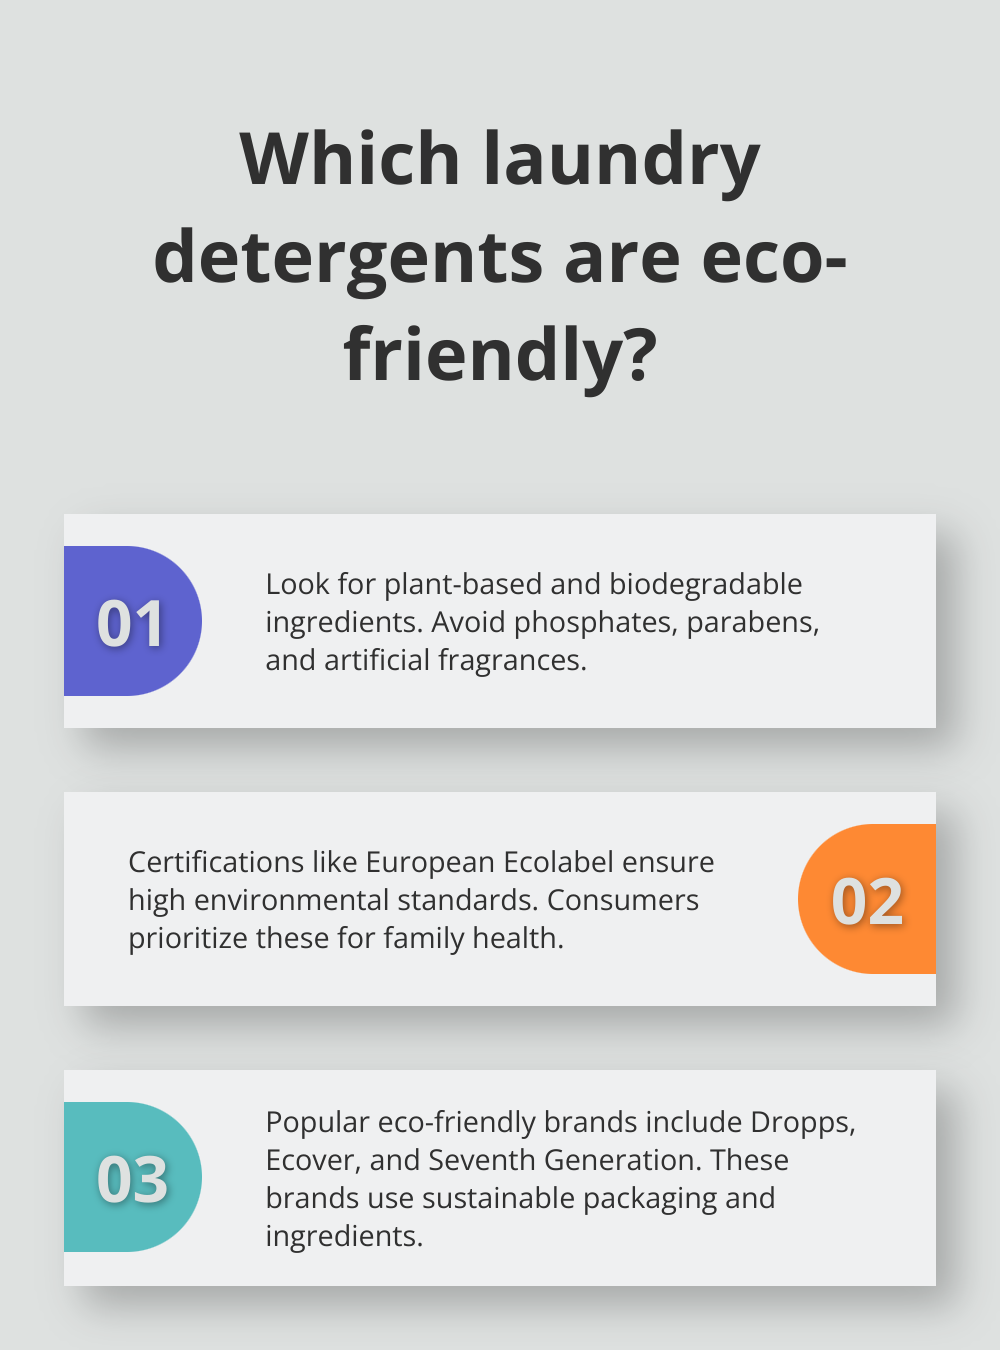 Fact - Which laundry detergents are eco-friendly?